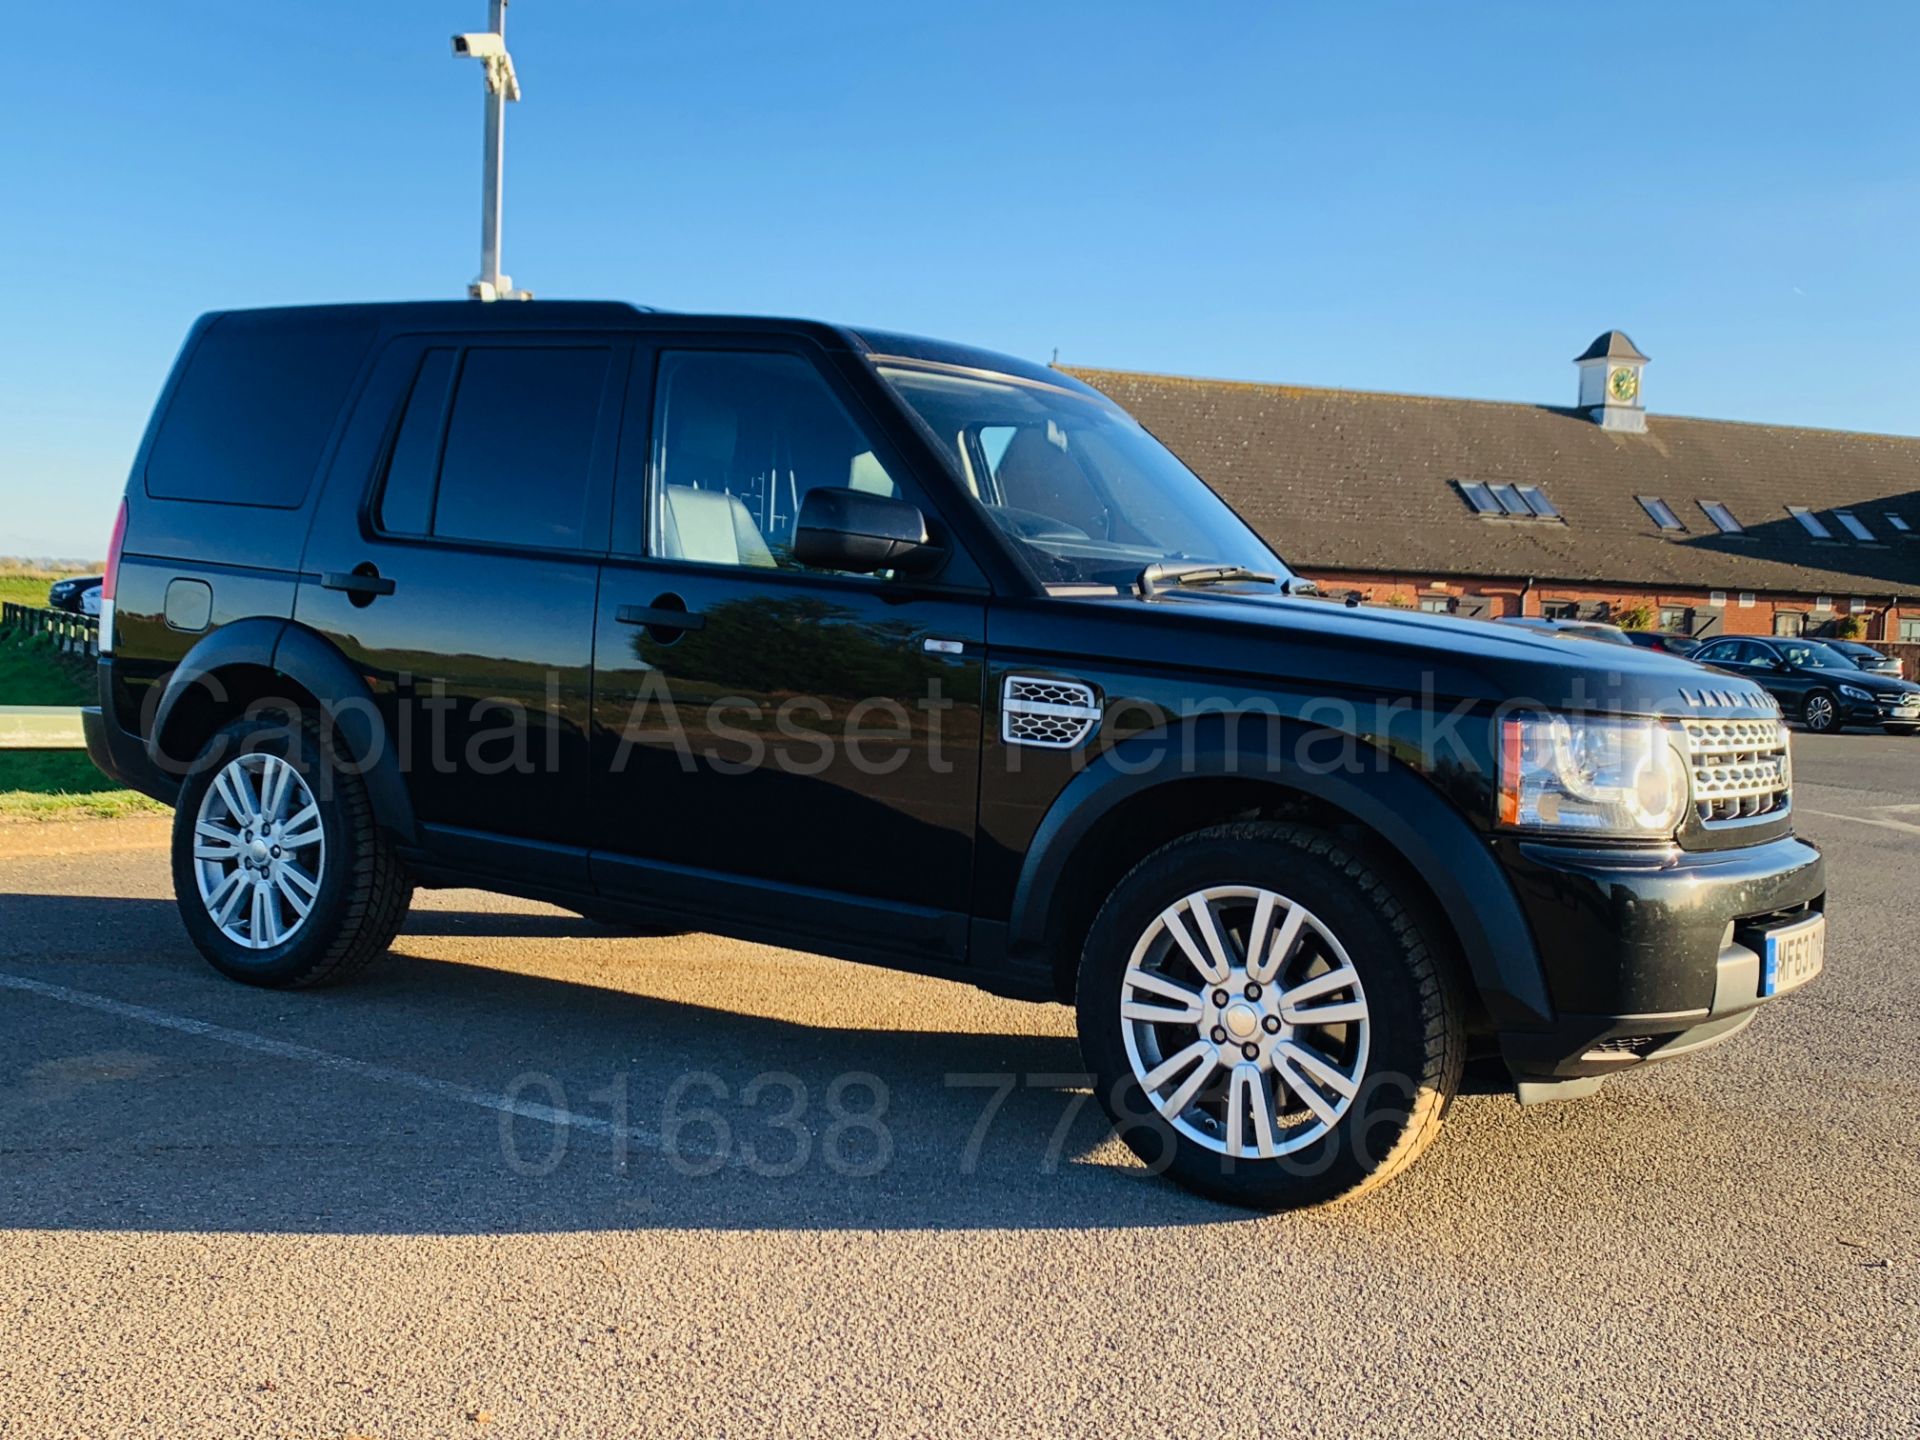 (On Sale) LAND ROVER DISCOVERY 4 (63 REG) '3.0 SDV6 - 8 SPEED AUTO' *LEATHER & SAT NAV* *TOP SPEC* - Image 2 of 47